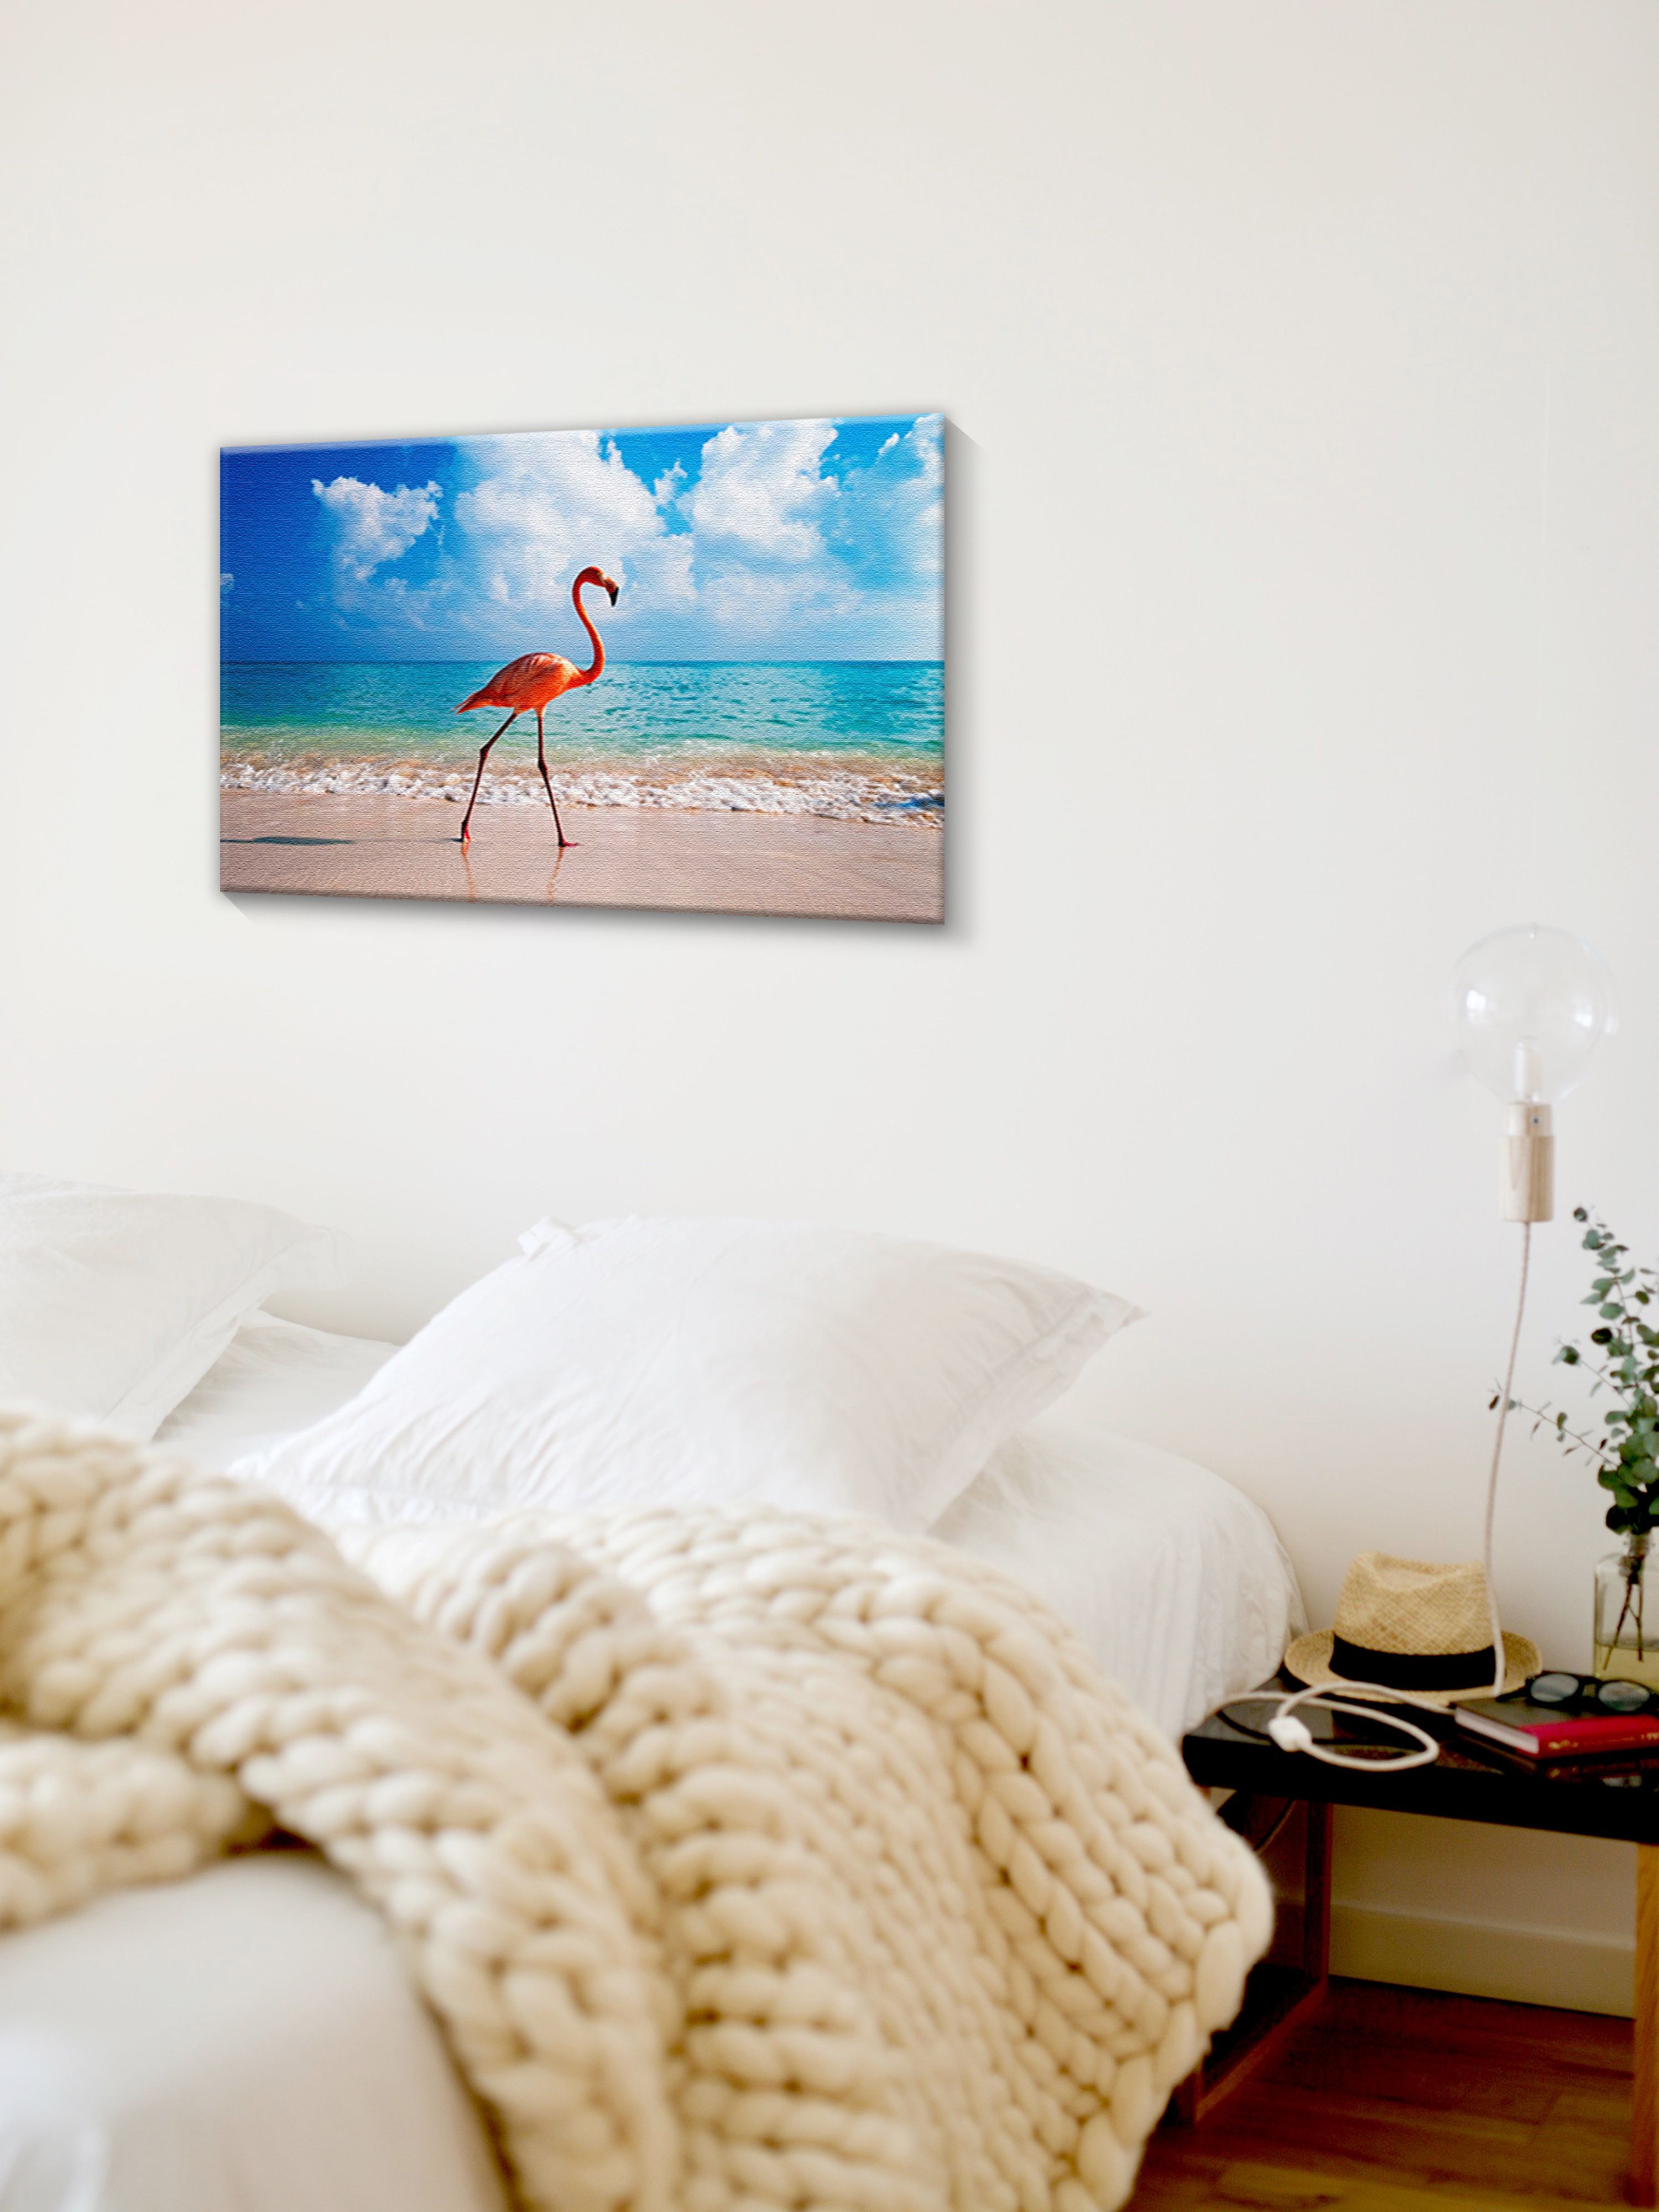 Awkward Styles Flamingos Illustration Pink Room Wall Art Beach Decals Room Decor Sea Room Decorations Flamingo Room Wall Decor Flamingo Canvas Decor Ideas Ready to Hang Picture Home Decor Ideas - image 2 of 7